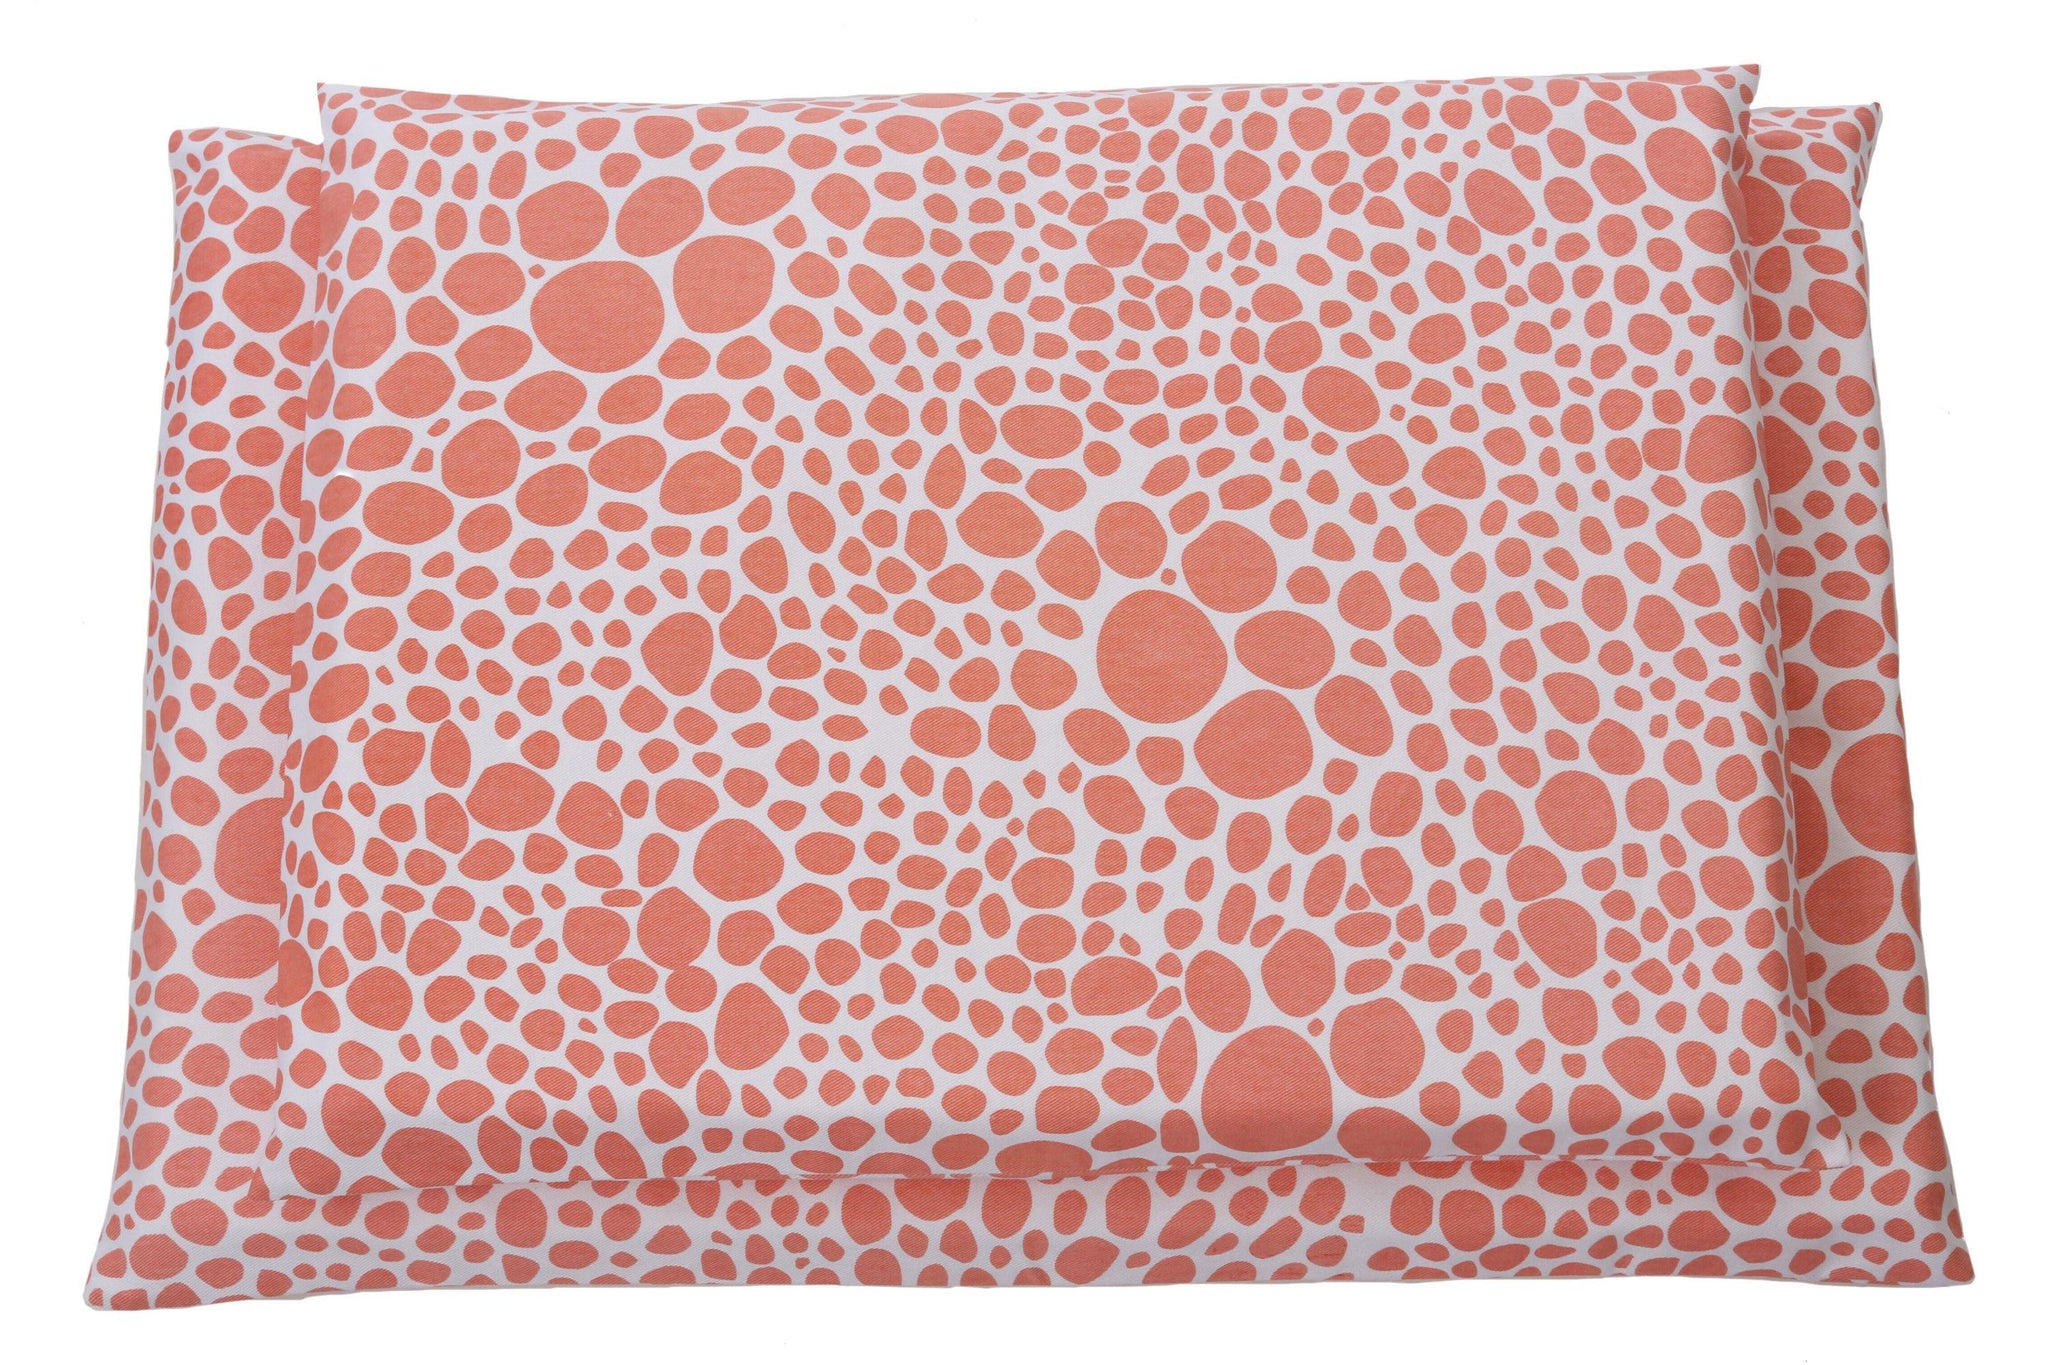 latex dog mat in coral and white